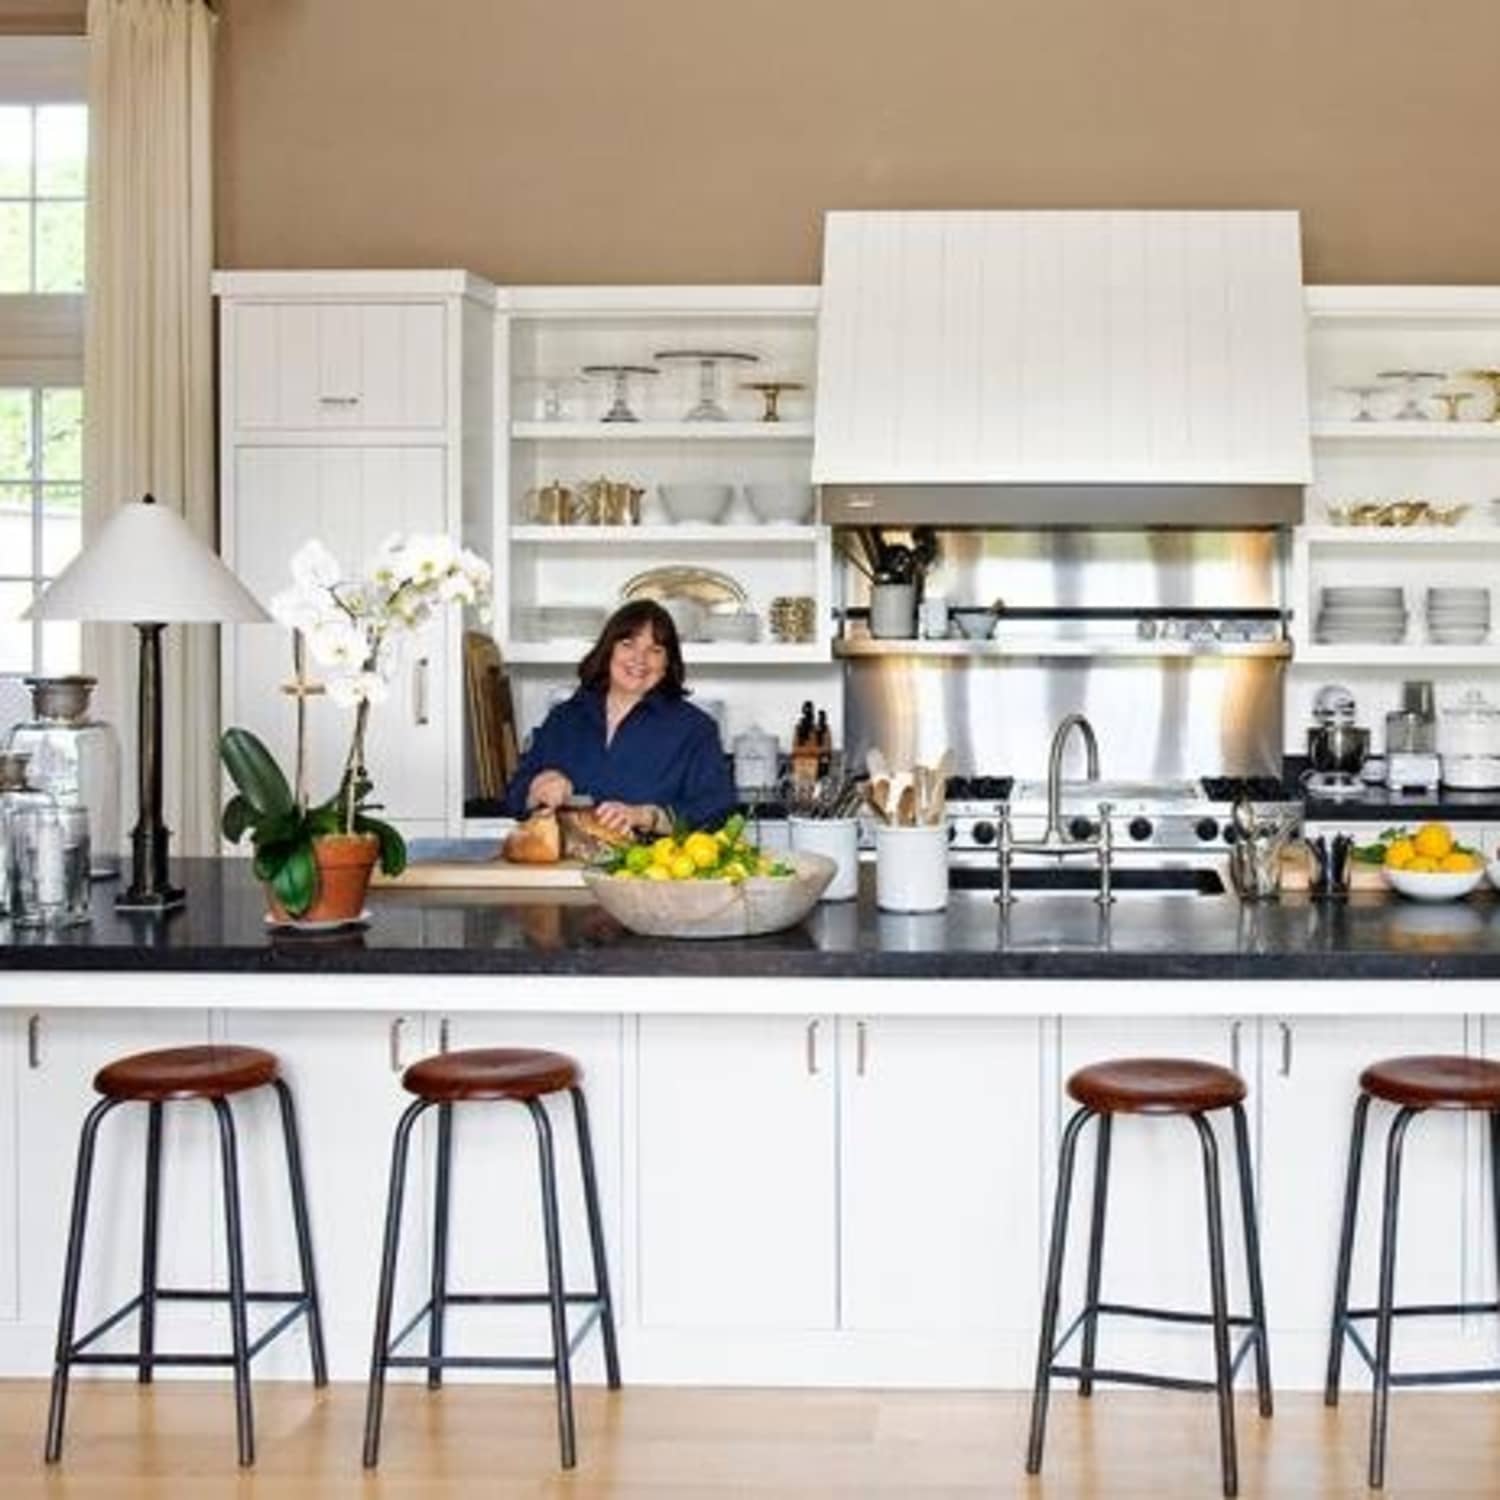 10 chef home kitchens we'd love to cook in | kitchn